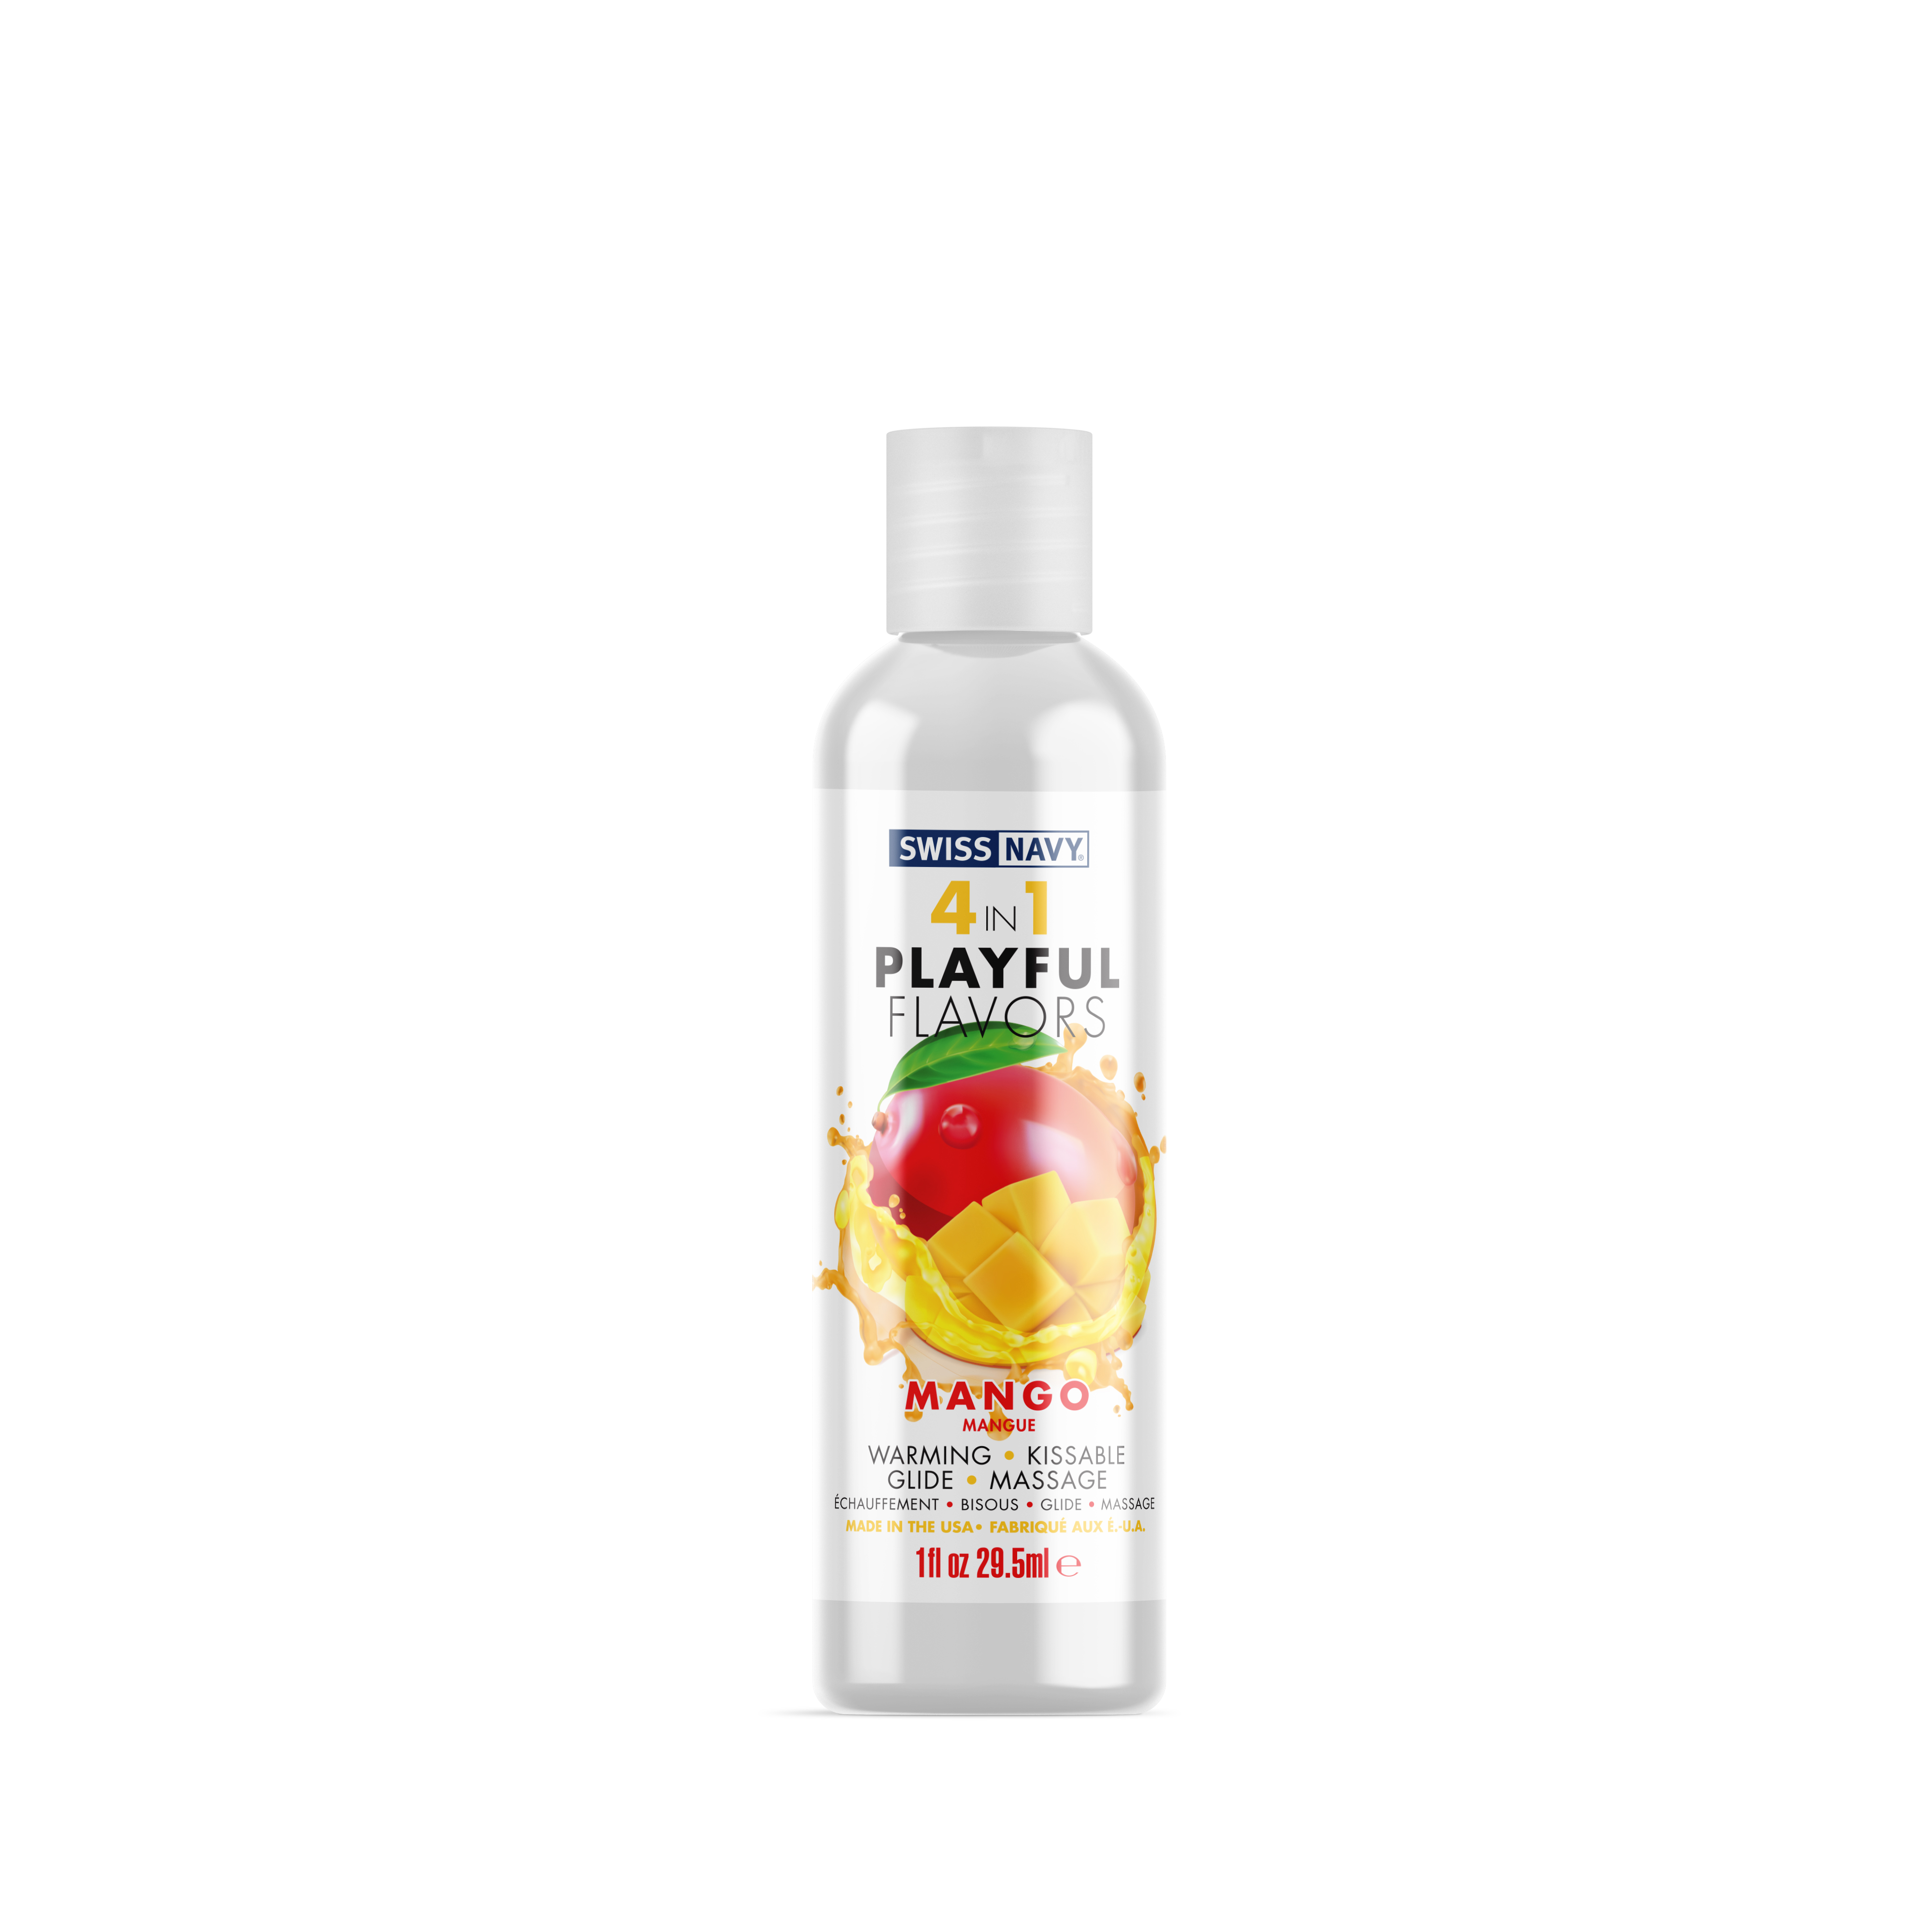 SWISS NAVY 4 IN 1 PLAYFUL FLAVORS MANGO 1 OZ - Click Image to Close